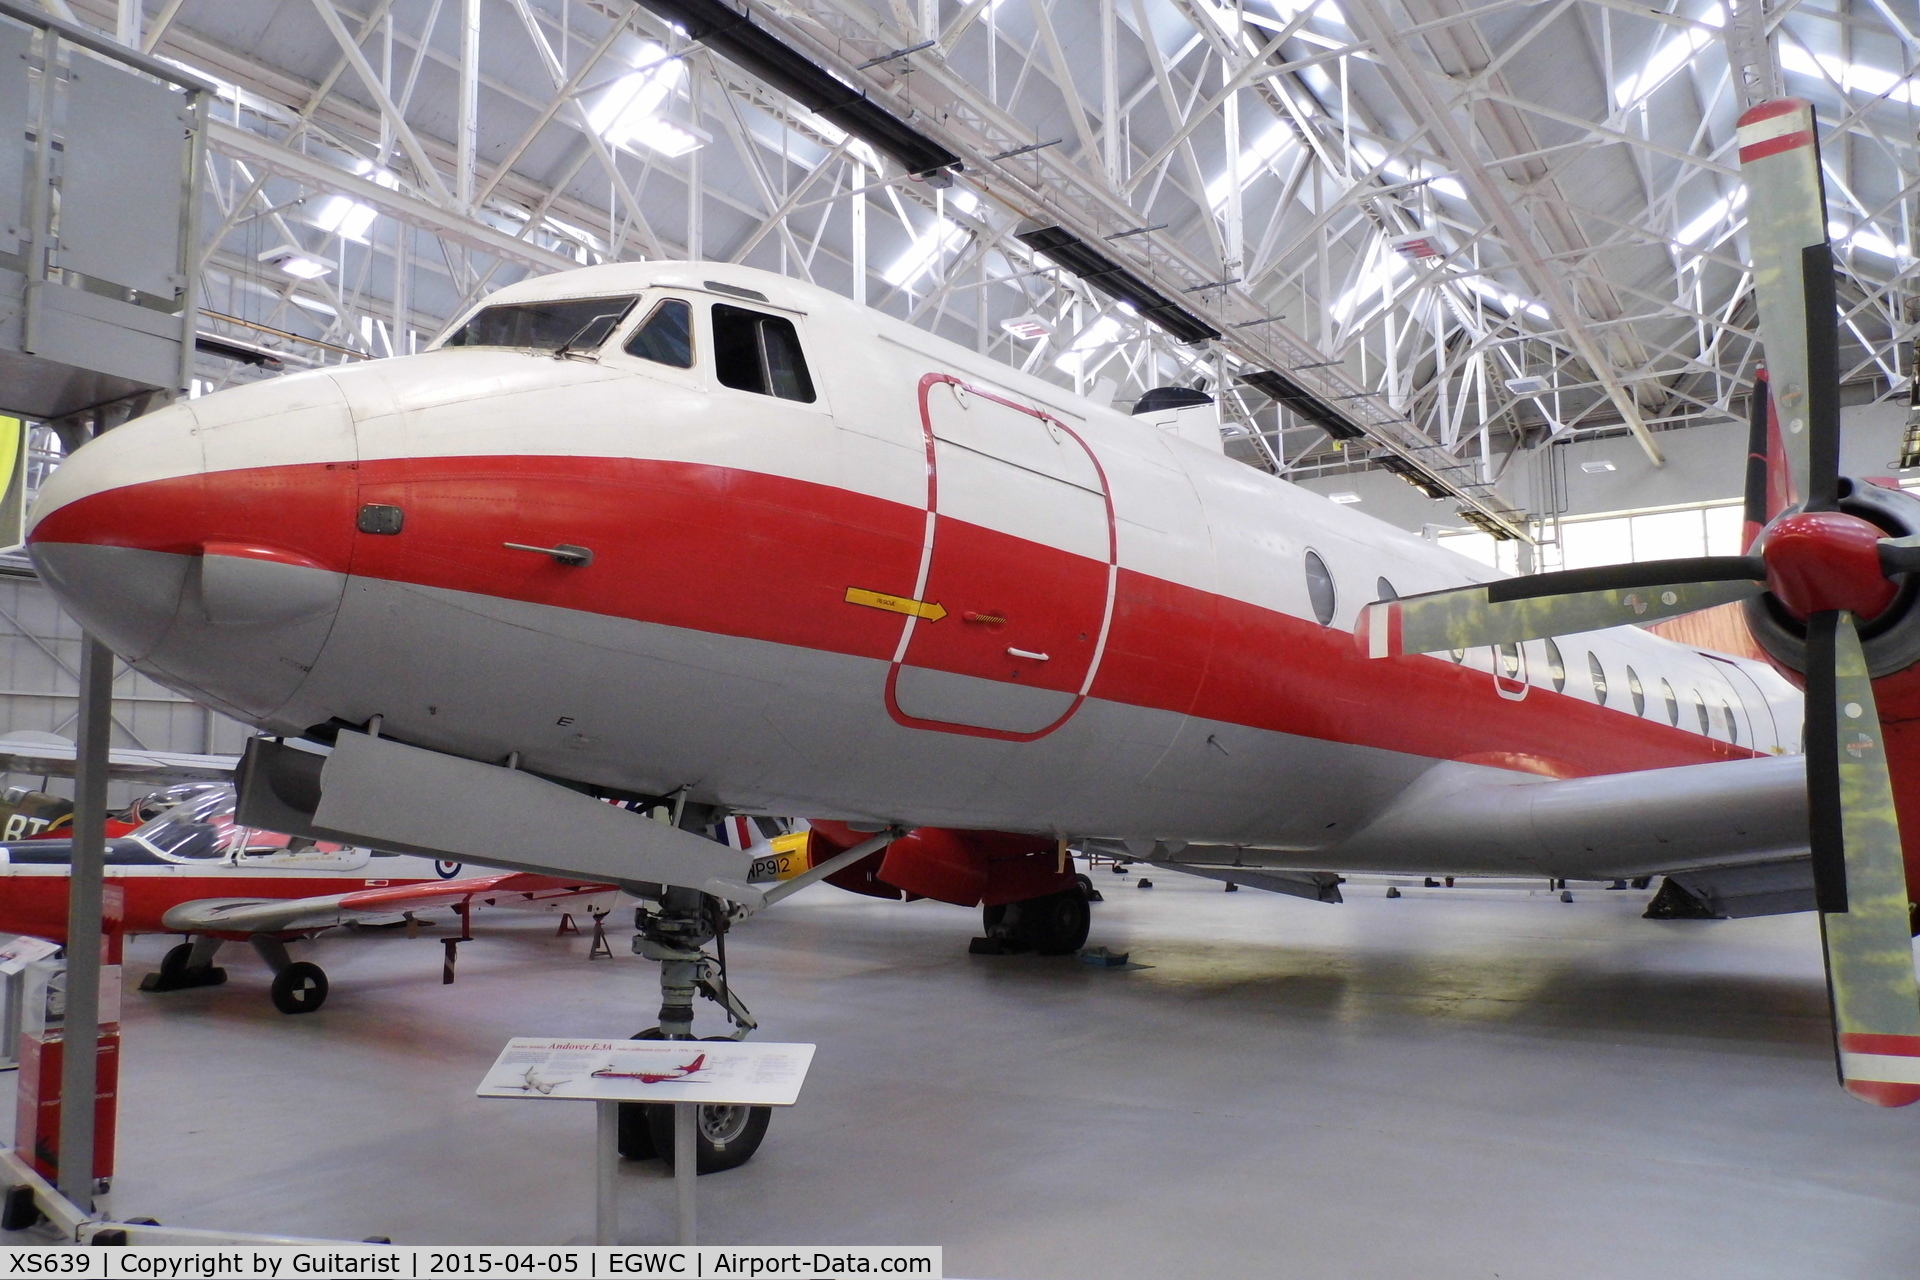 XS639, 1967 Hawker Siddeley HS-780 Andover E3A C/N Set23/BN23, Cosford Air Museum